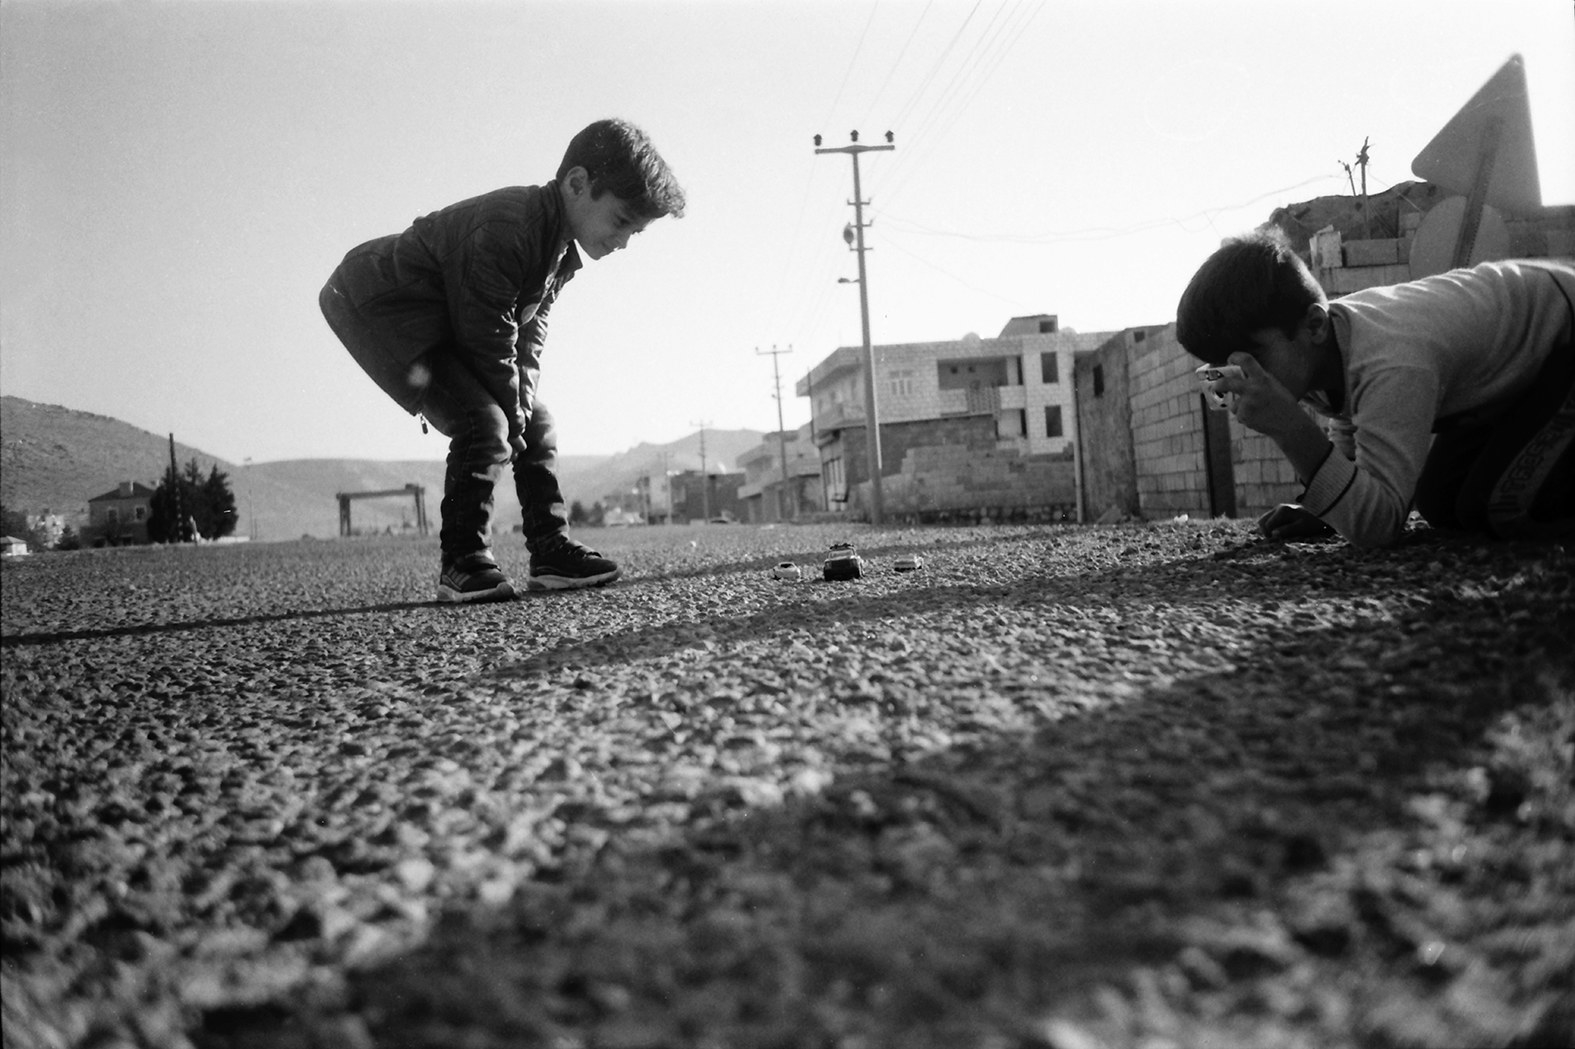 A young boy crouches in the street while another boy takes photos of objects arranged in front of him 